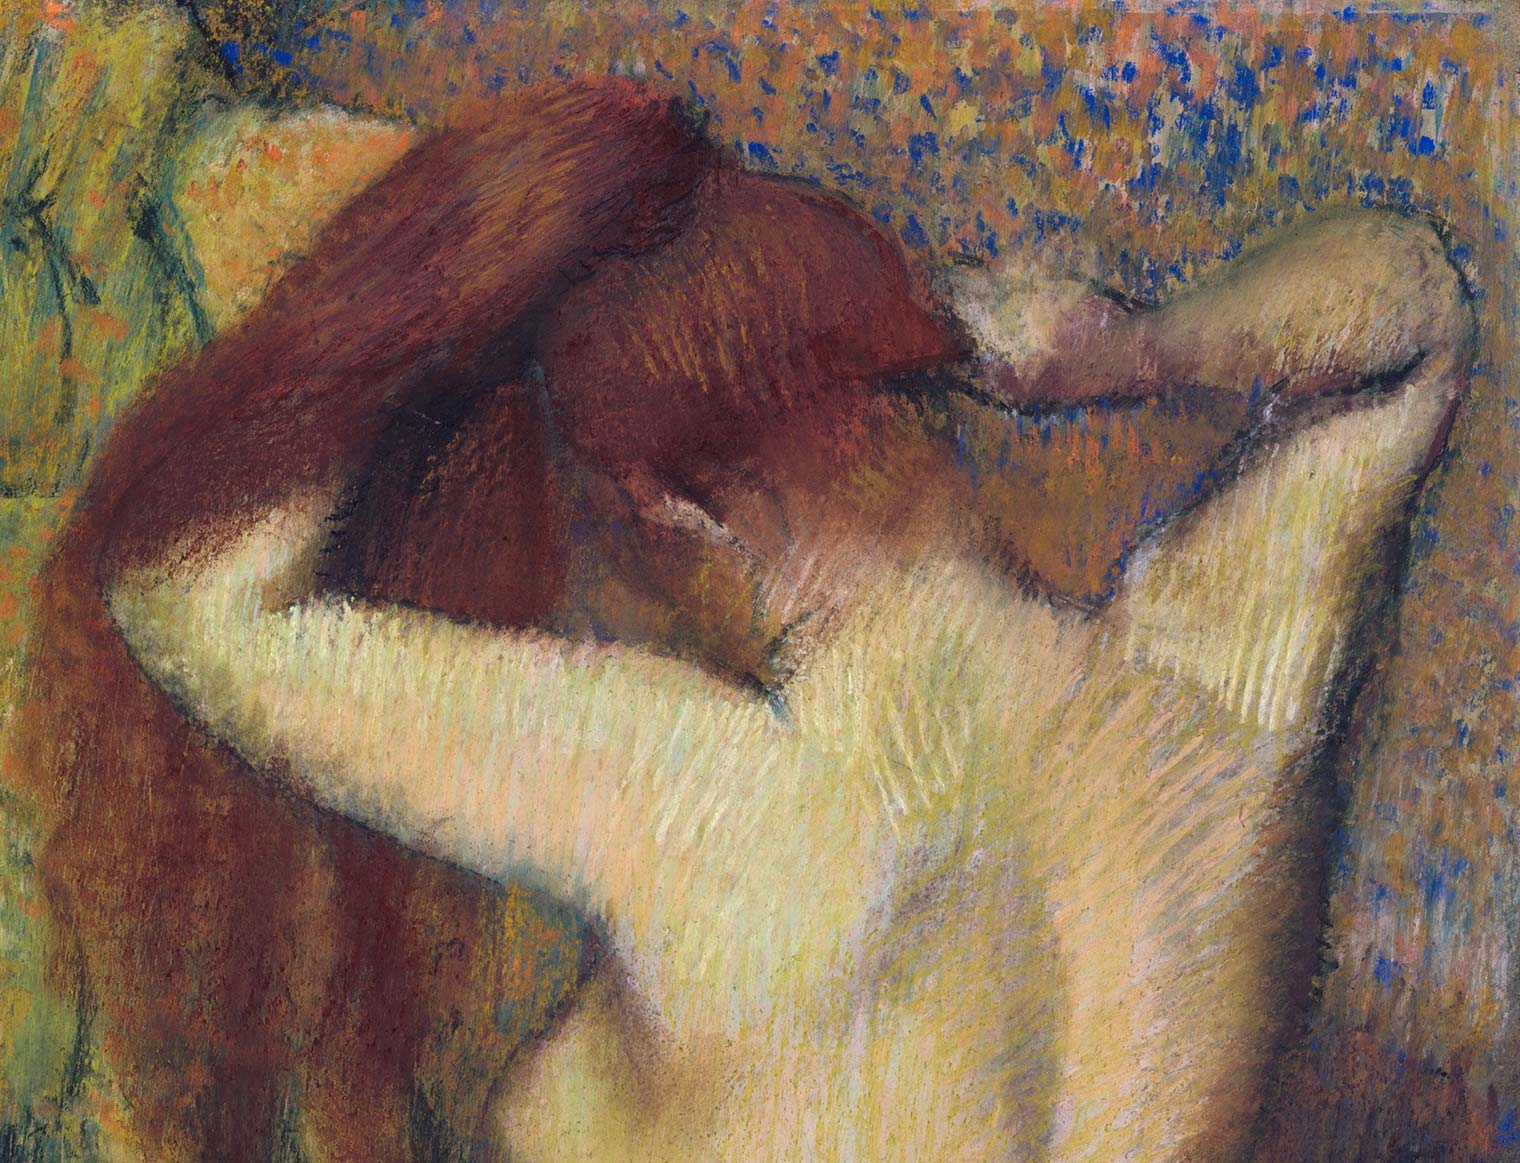 A colorful pastel drawing of a nude woman